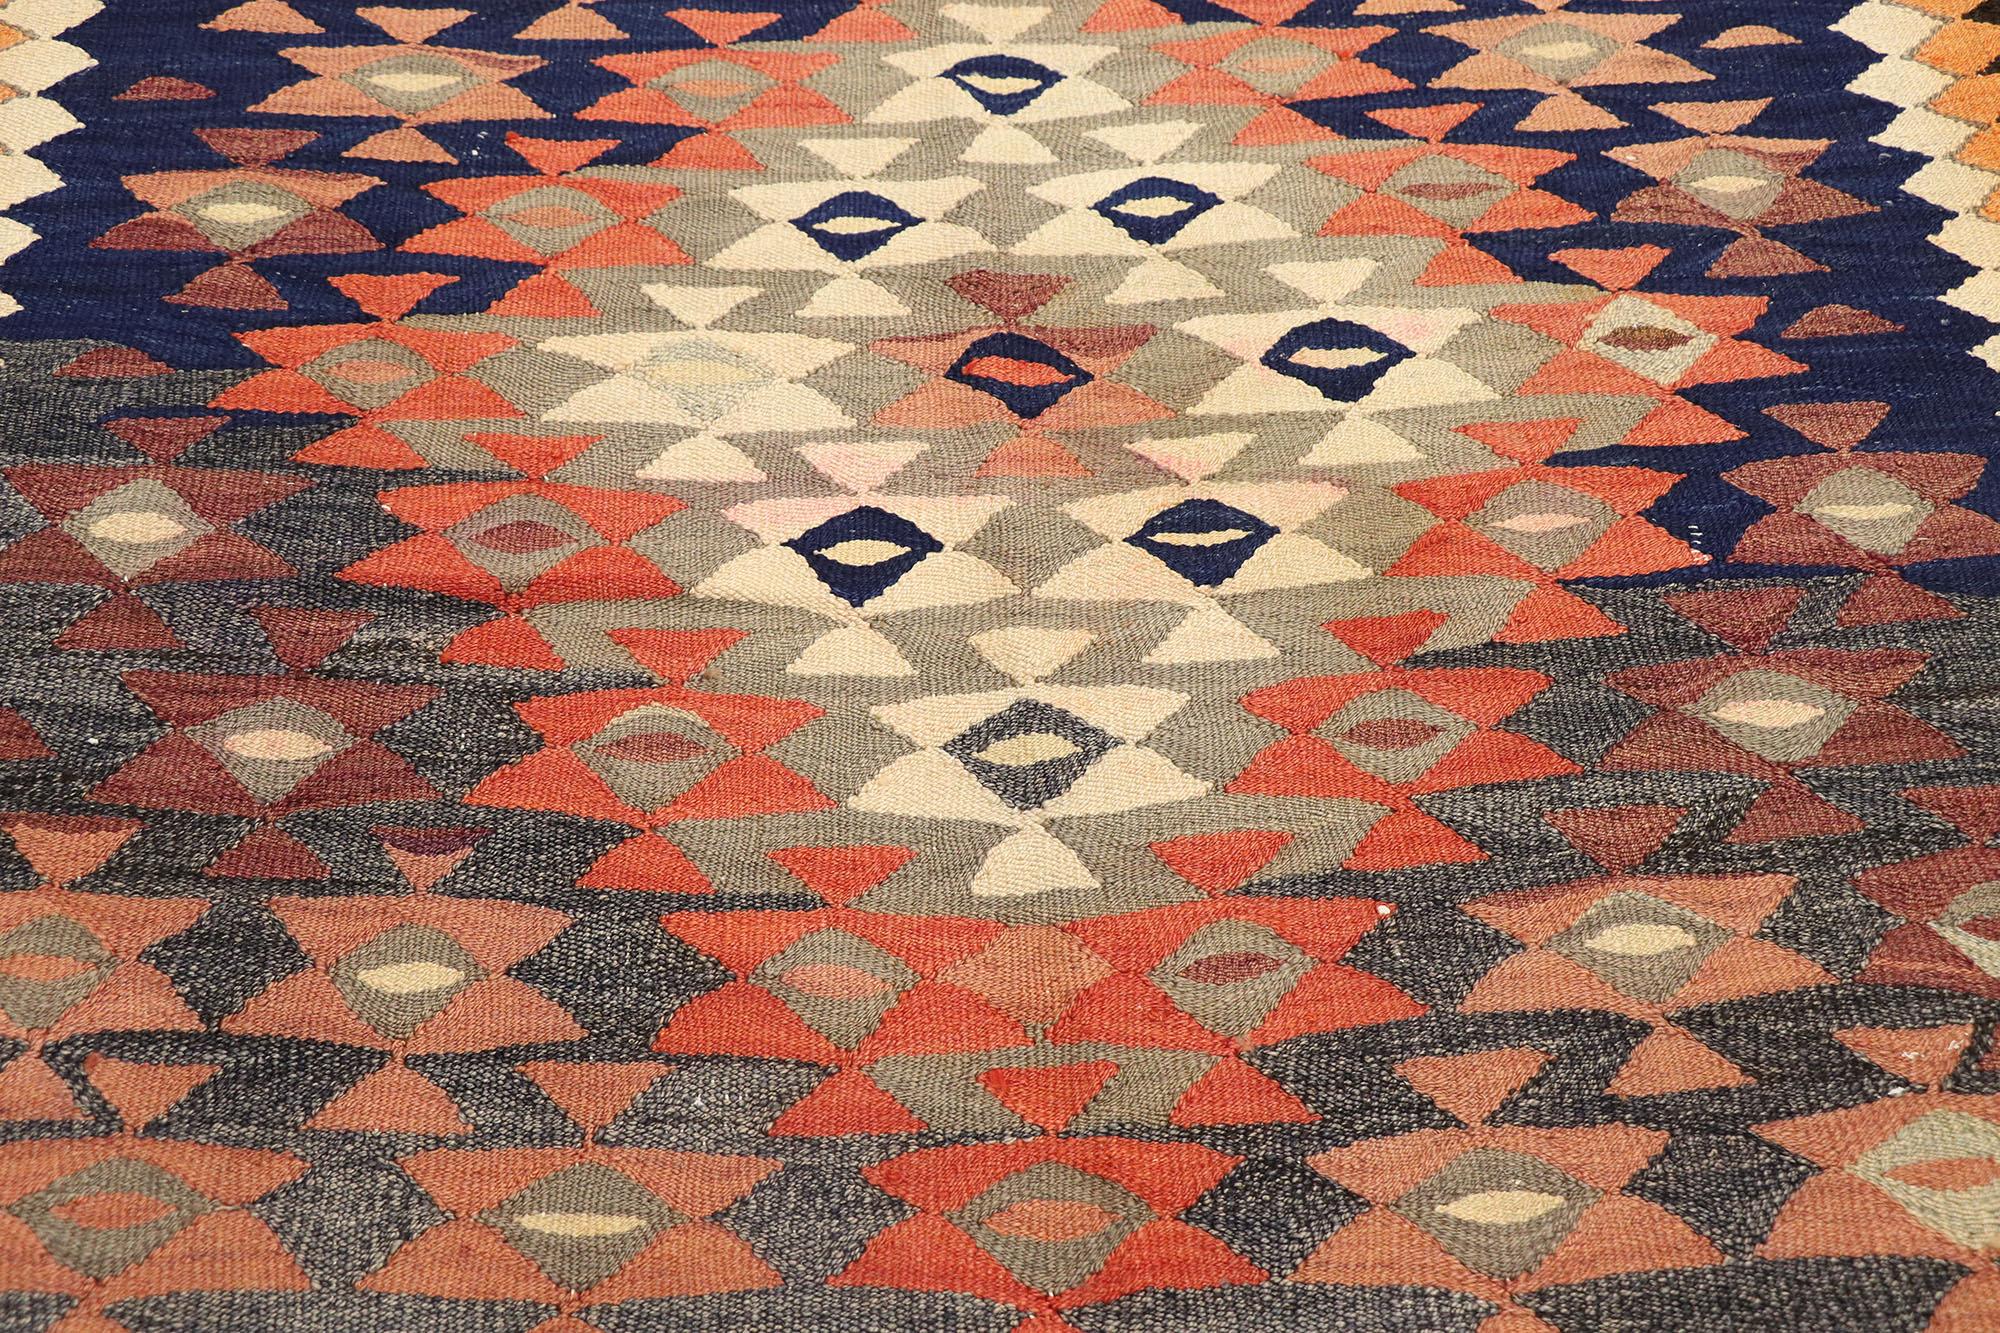 Vintage Persian Bijar Kilim Rug, Tribal Enchantment Meets Southwest Desert Chic In Good Condition For Sale In Dallas, TX